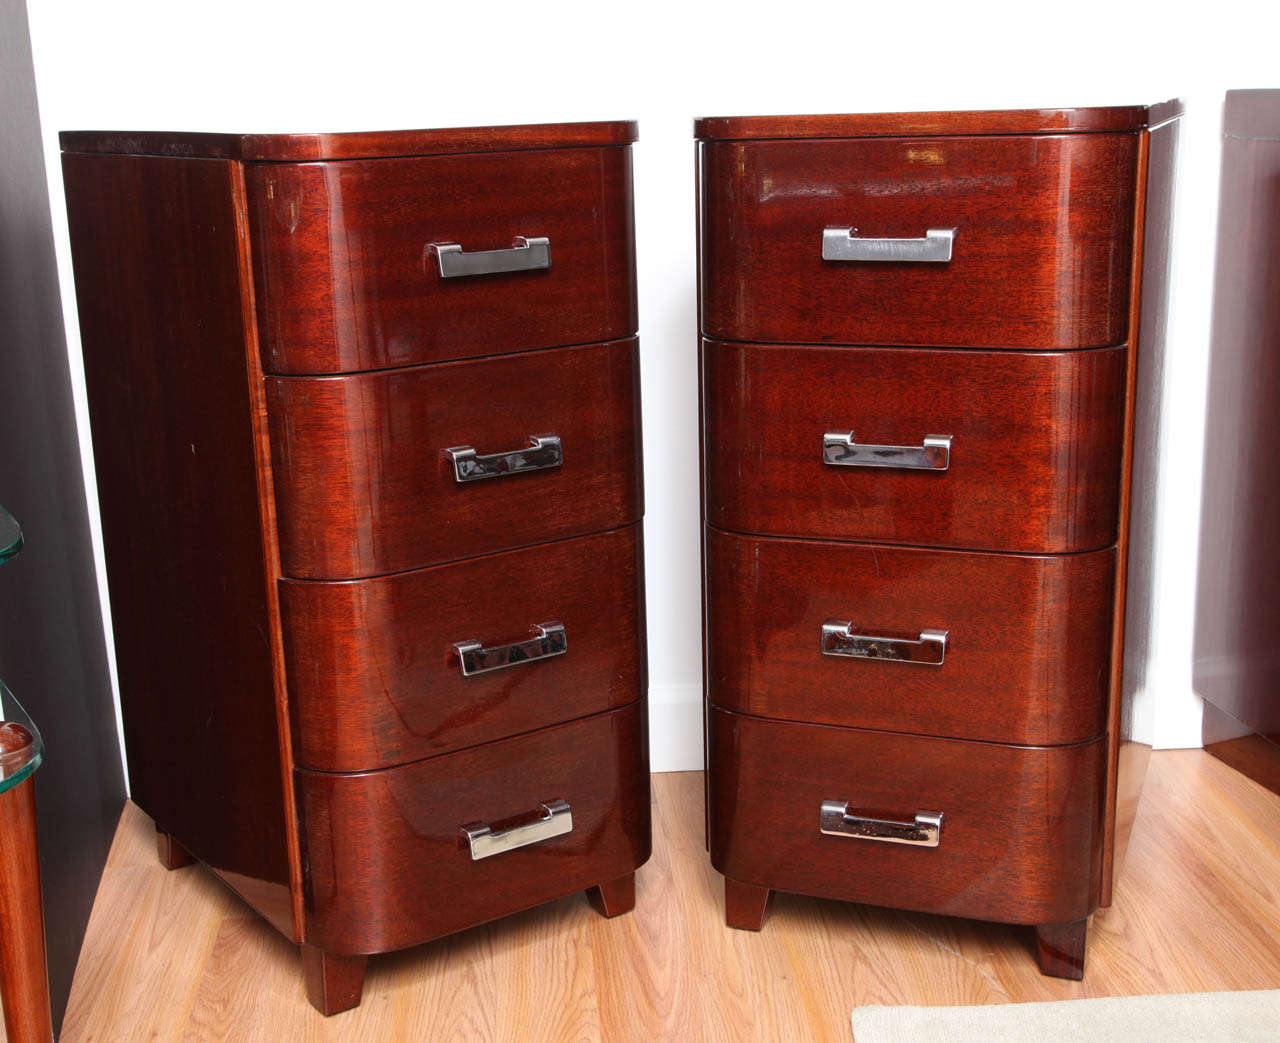 Pair of tall Art Deco streamline nightstands with four drawers in solid mahogany.